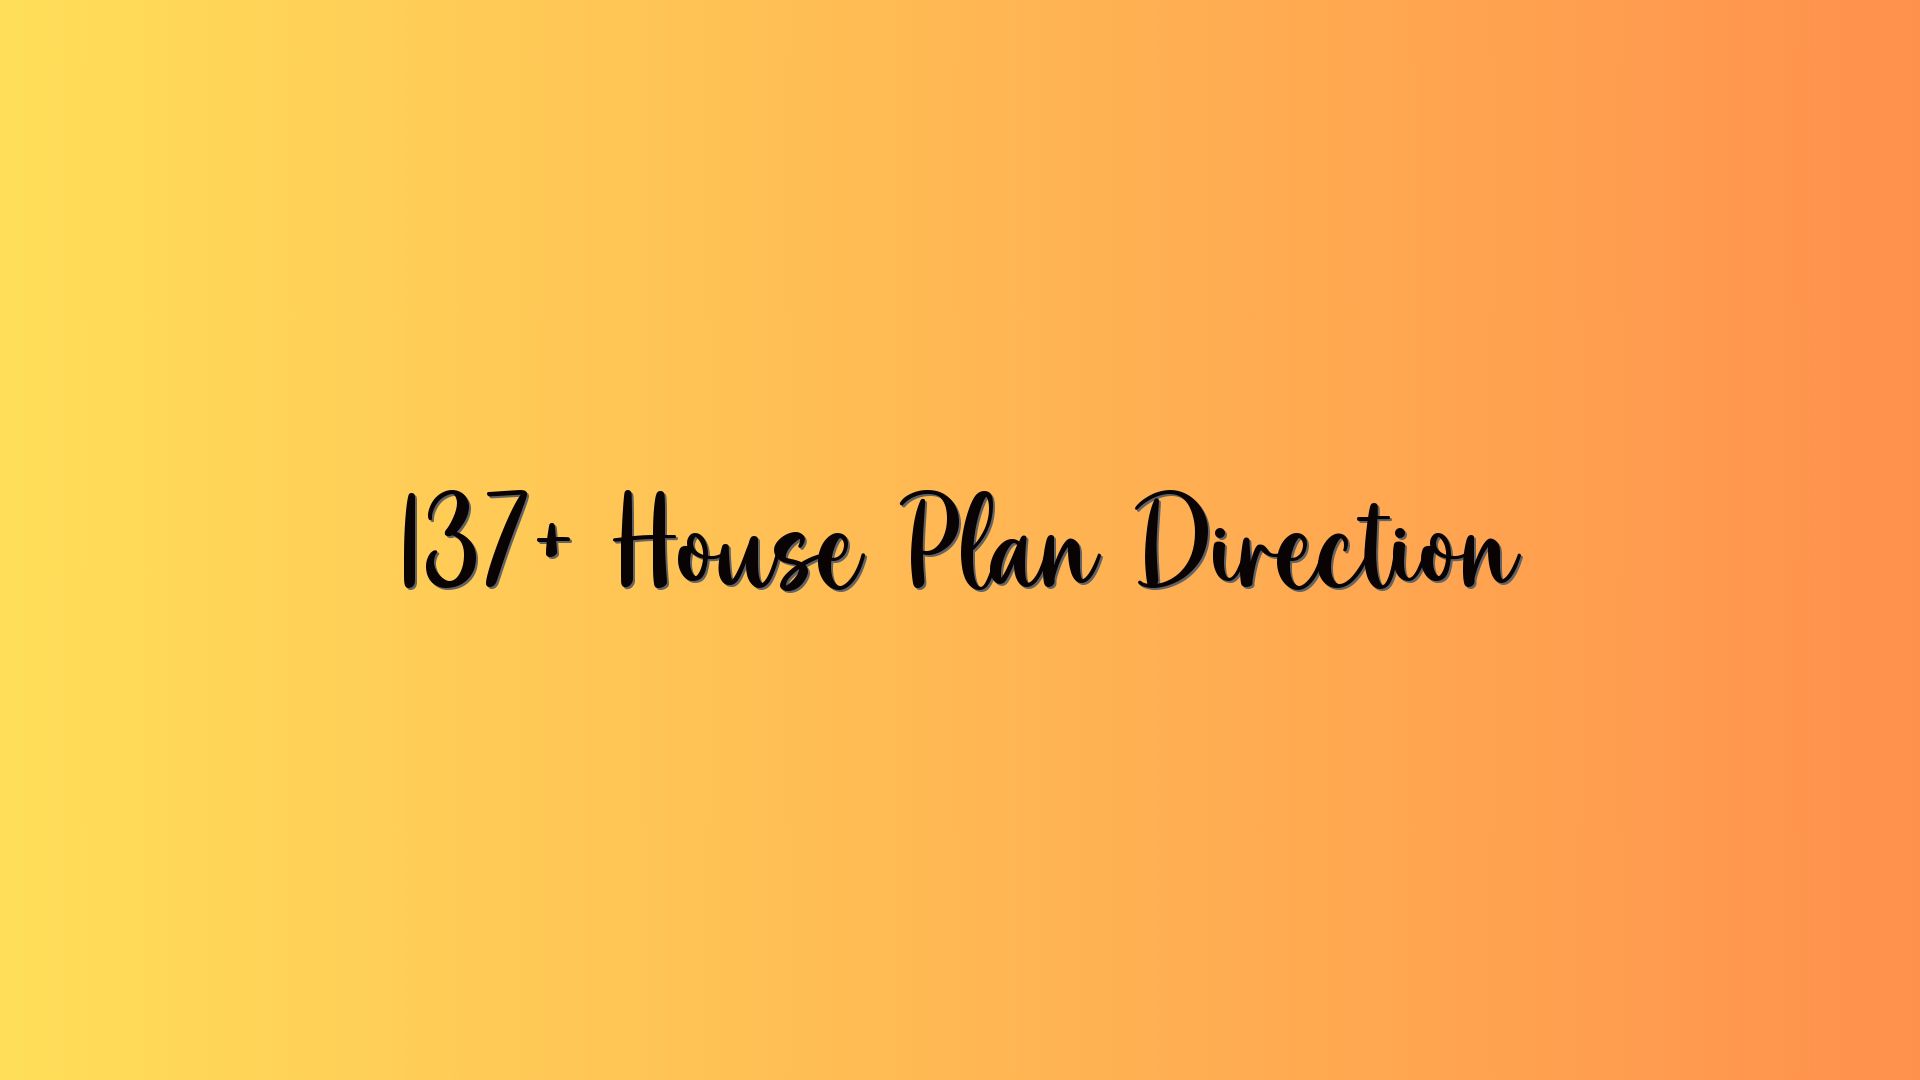 137+ House Plan Direction